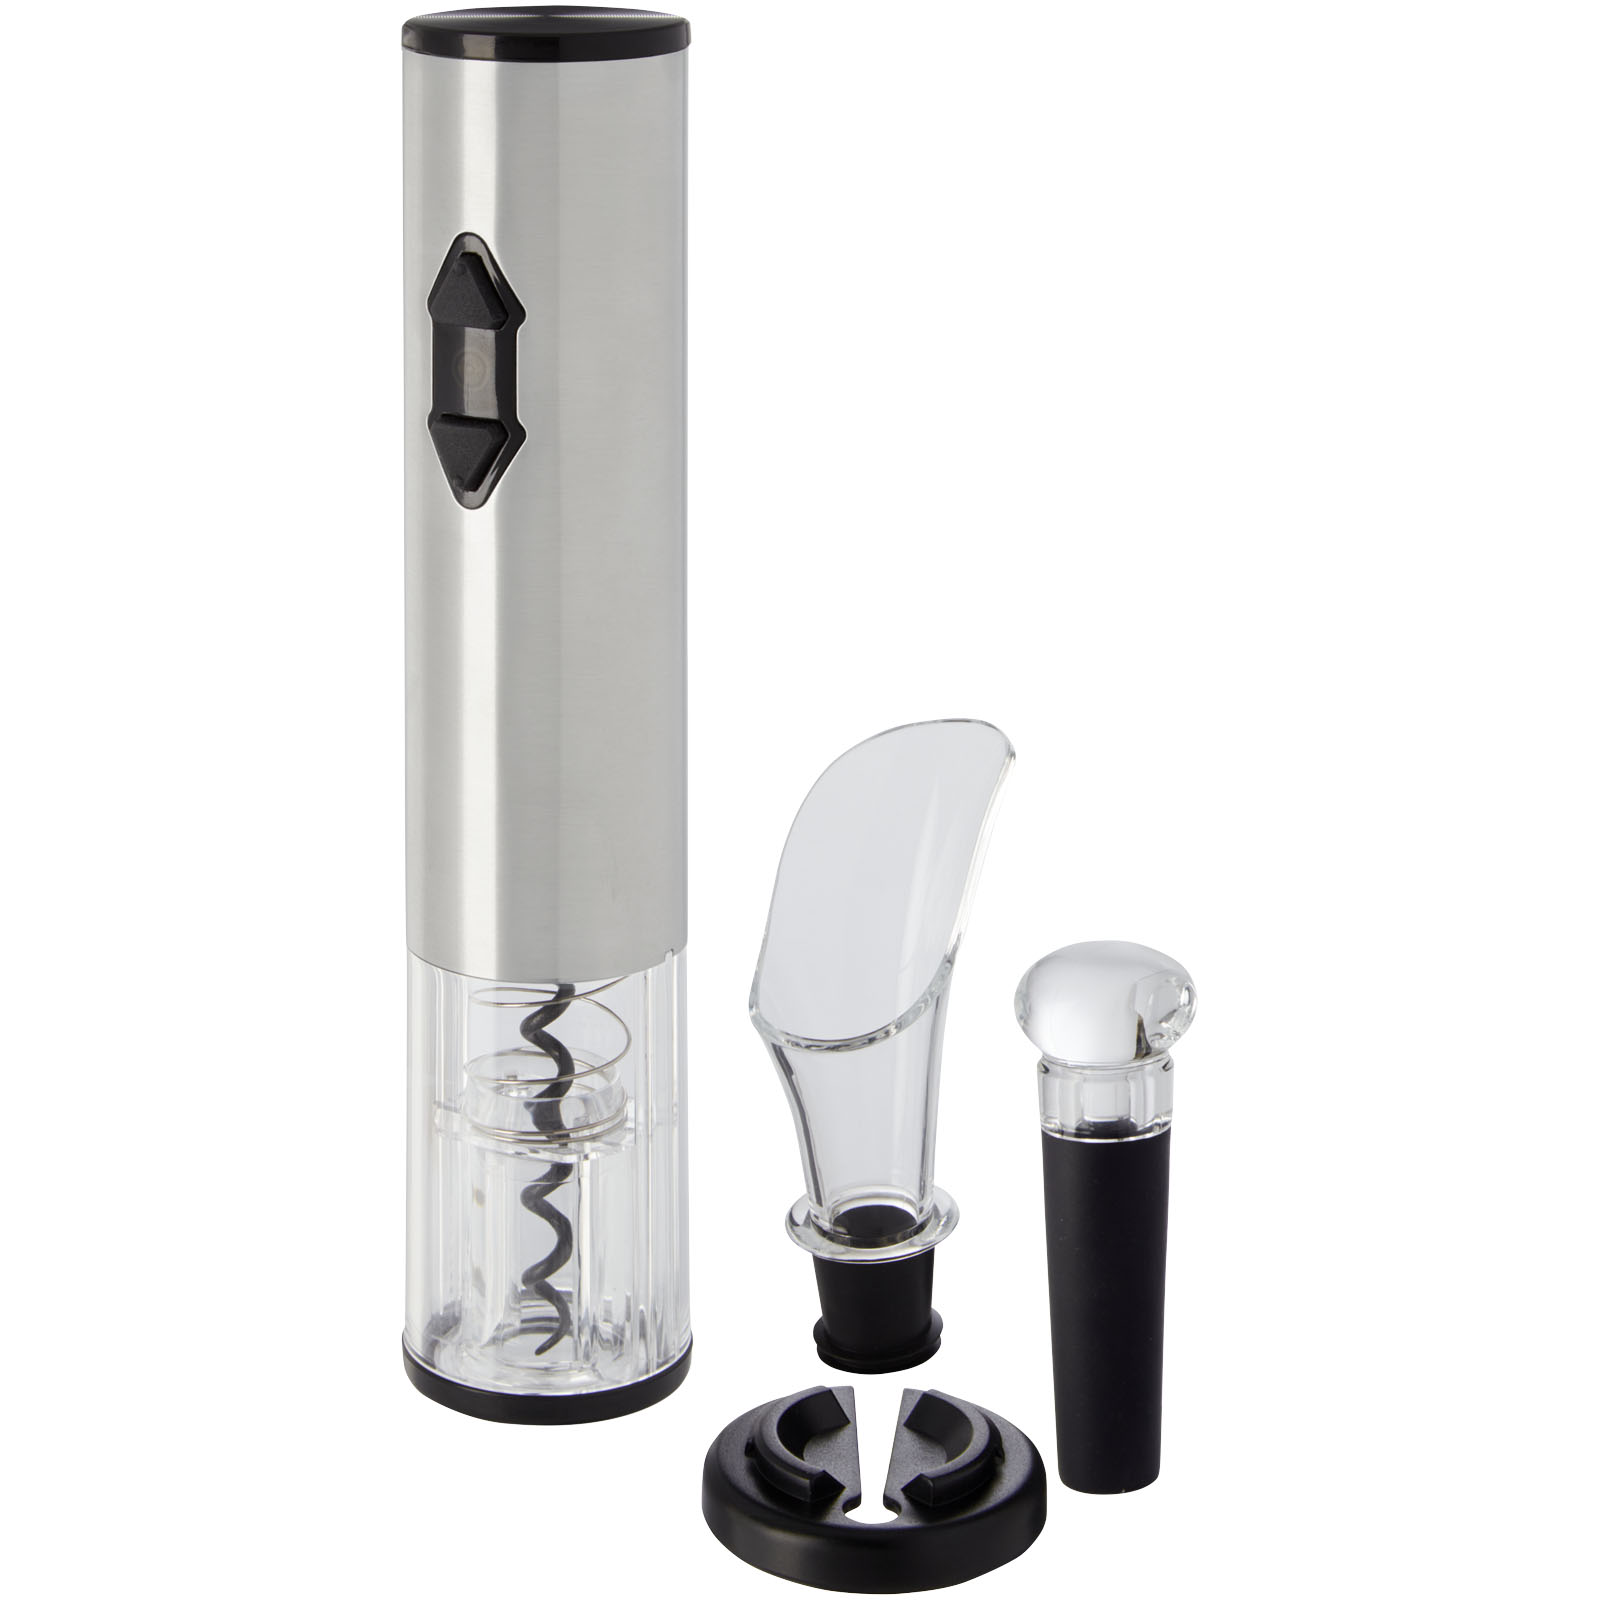 Home & Kitchen - Pino electric wine opener with wine tools